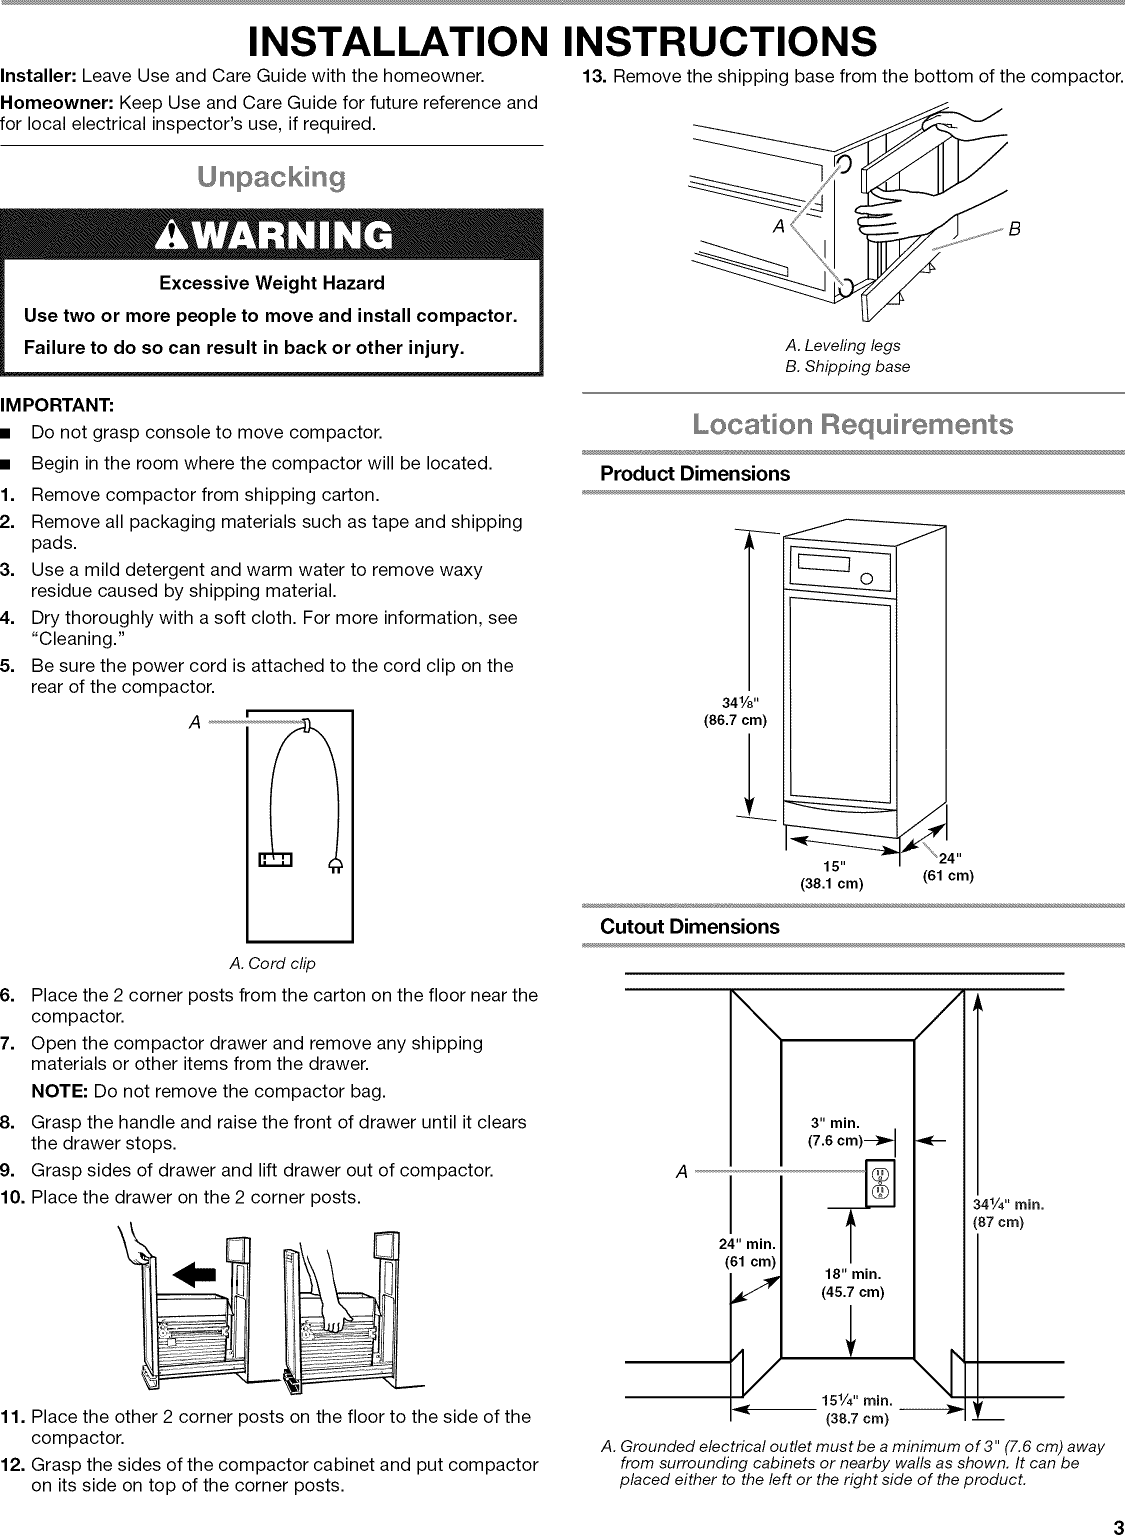 Page 3 of 12 - Whirlpool GC900QPPB6 1512363L User Manual  TRASH COMPACTOR - Manuals And Guides